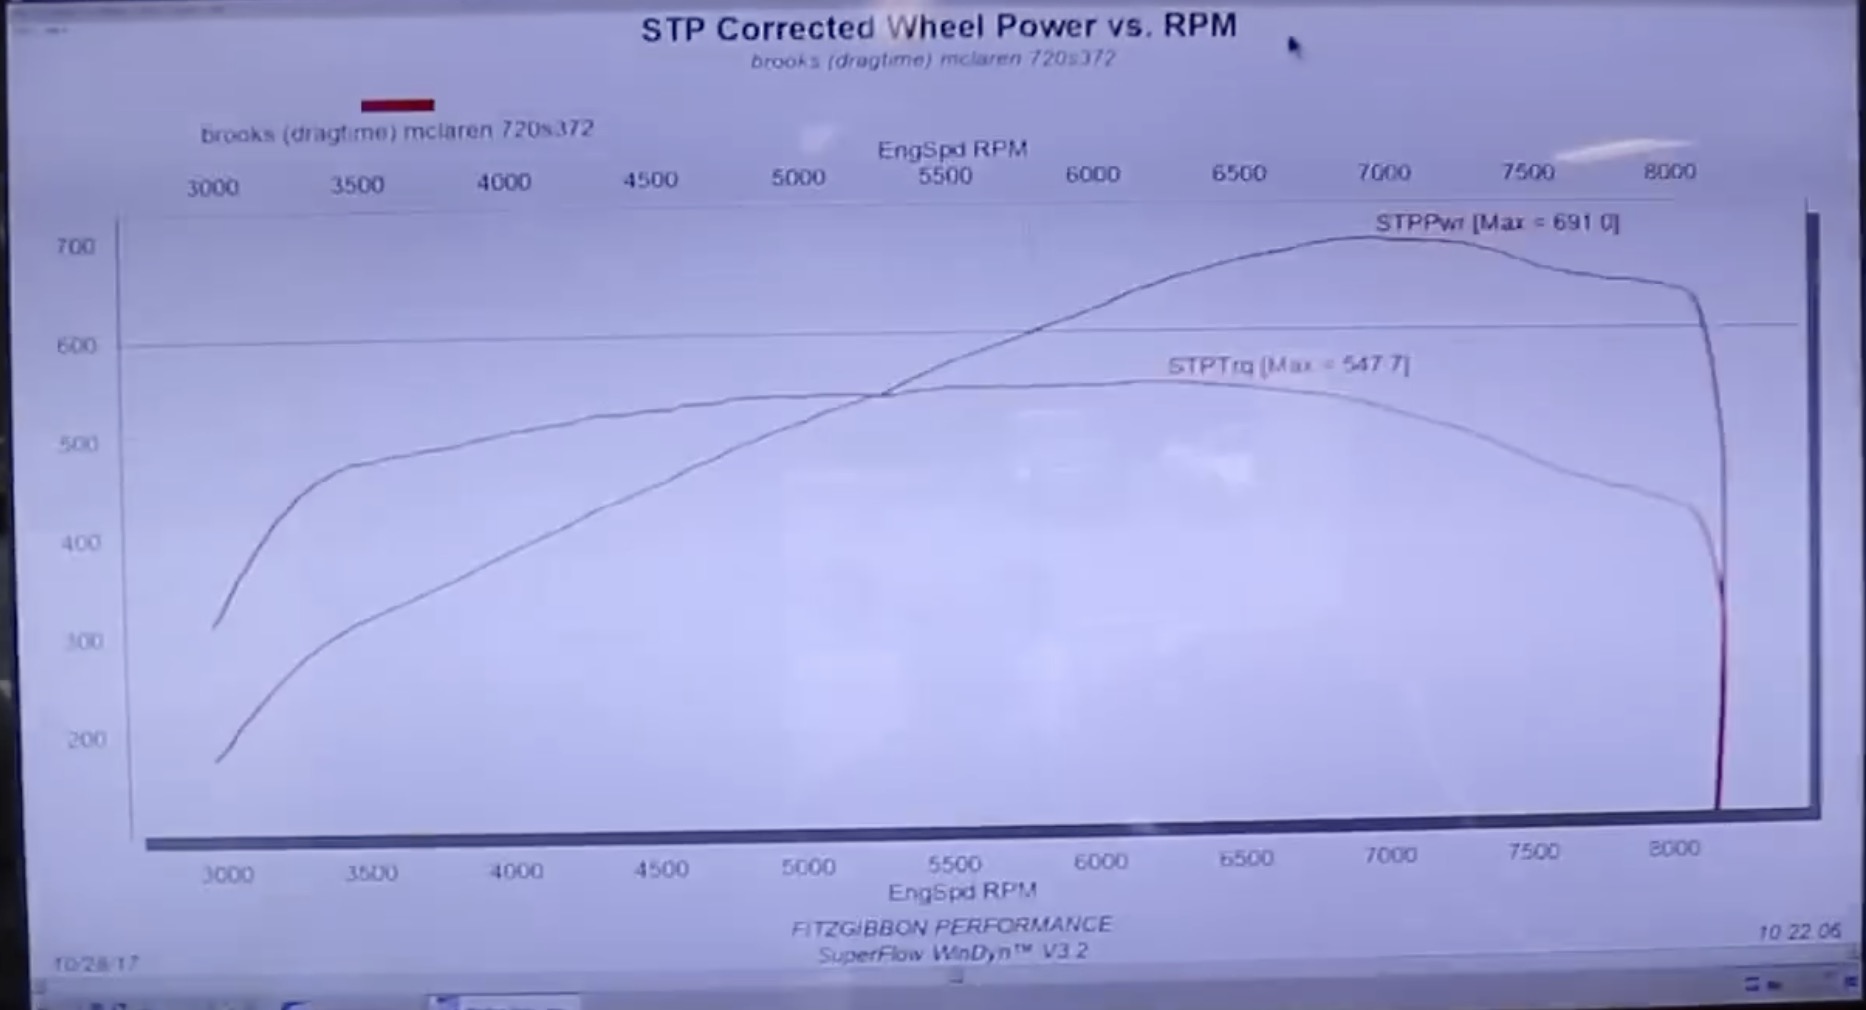 McLaren 720S Dyno Graph Results